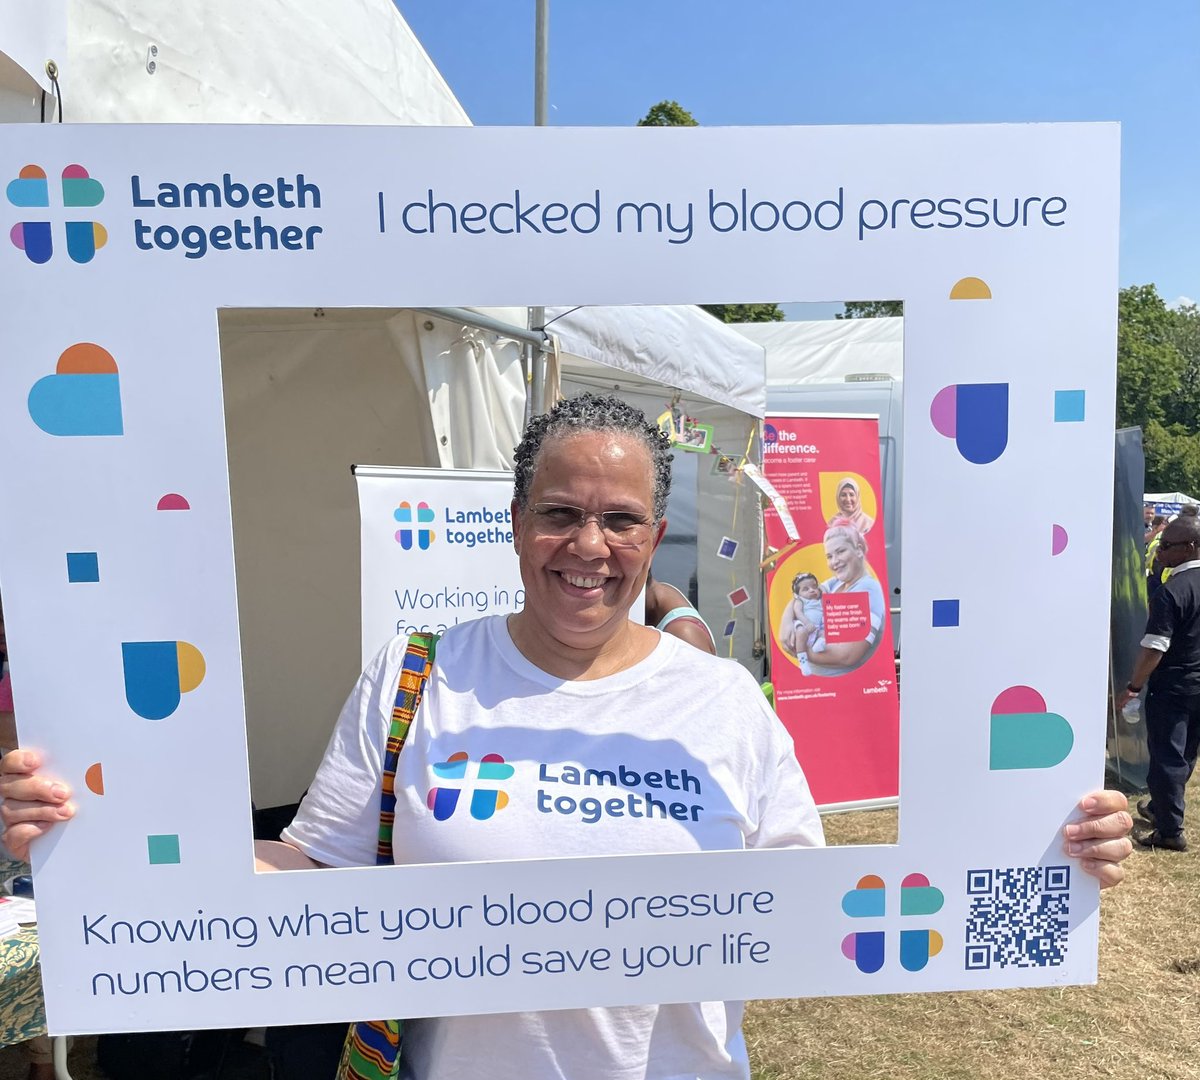 Free blood pressure checks with Lambeth Together at Lambeth Country Show today. Doesn’t Juliet look happy after hers?

A quick free check could save your life. 

Our team of health professionals are in Brockwell Park Sun 11 June 1-6pm so be like Juliet and come have a chat
#LCS23